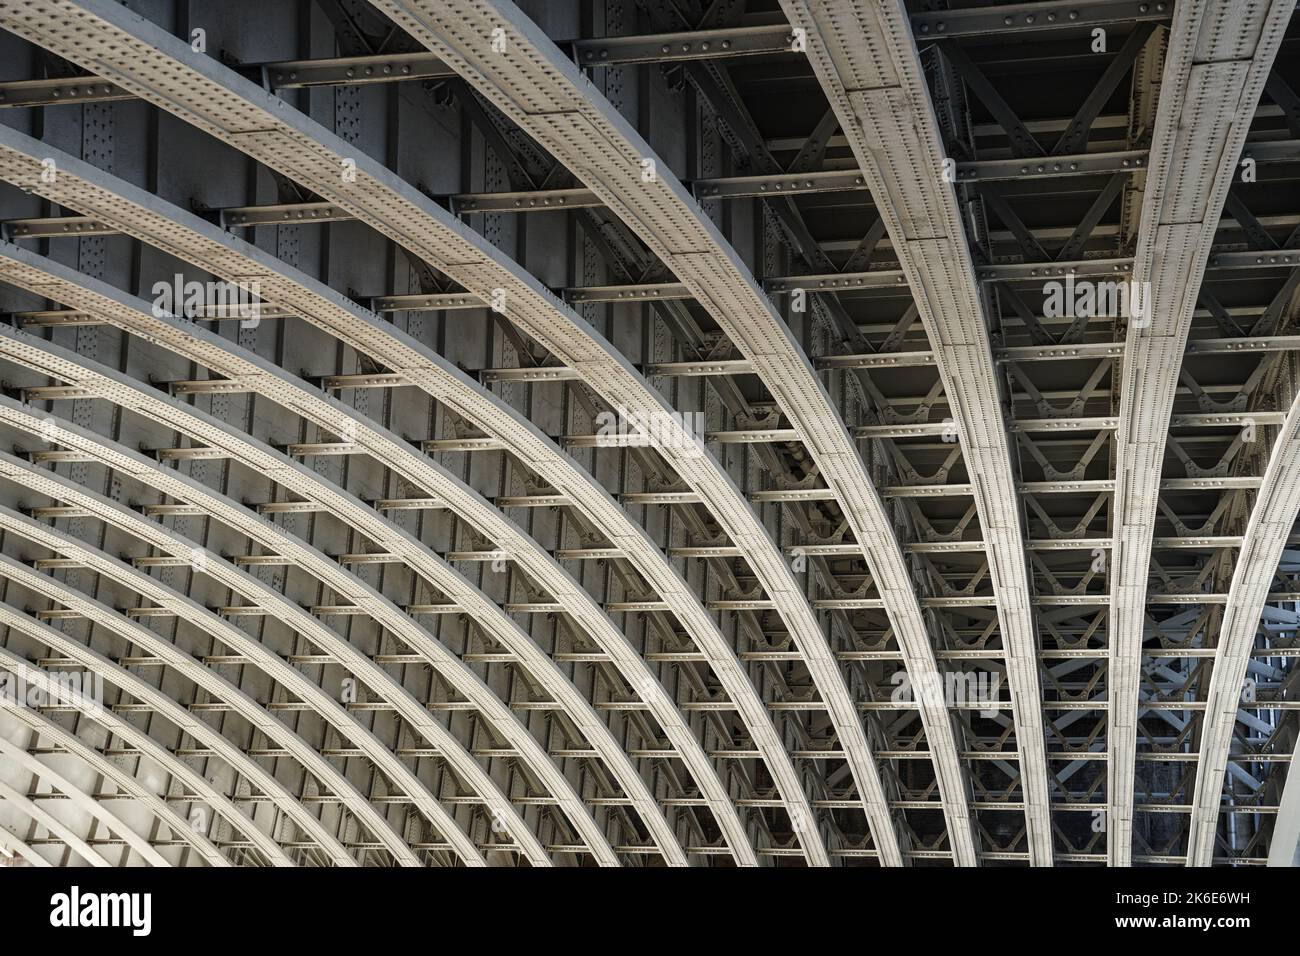 Metal bridge structure, bottom view of arched span Stock Photo